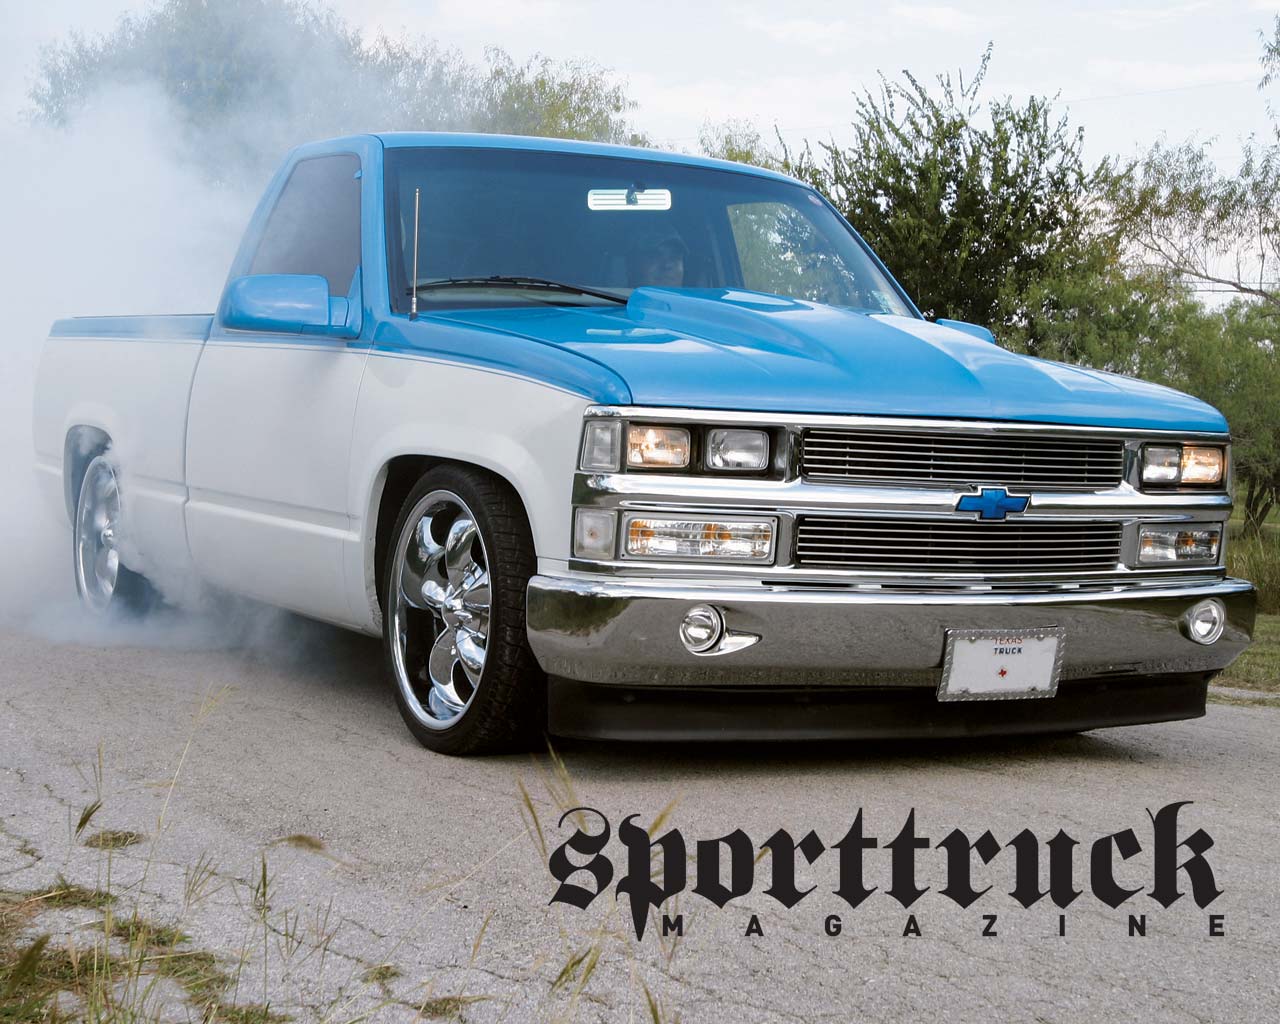 Vehicles trucks chevy chevrolet tuning lowrider low wheels rims grill front  end headlights lights contrast stance custom classic muscle retro old  wallpaper  1920x1080  25571  WallpaperUP